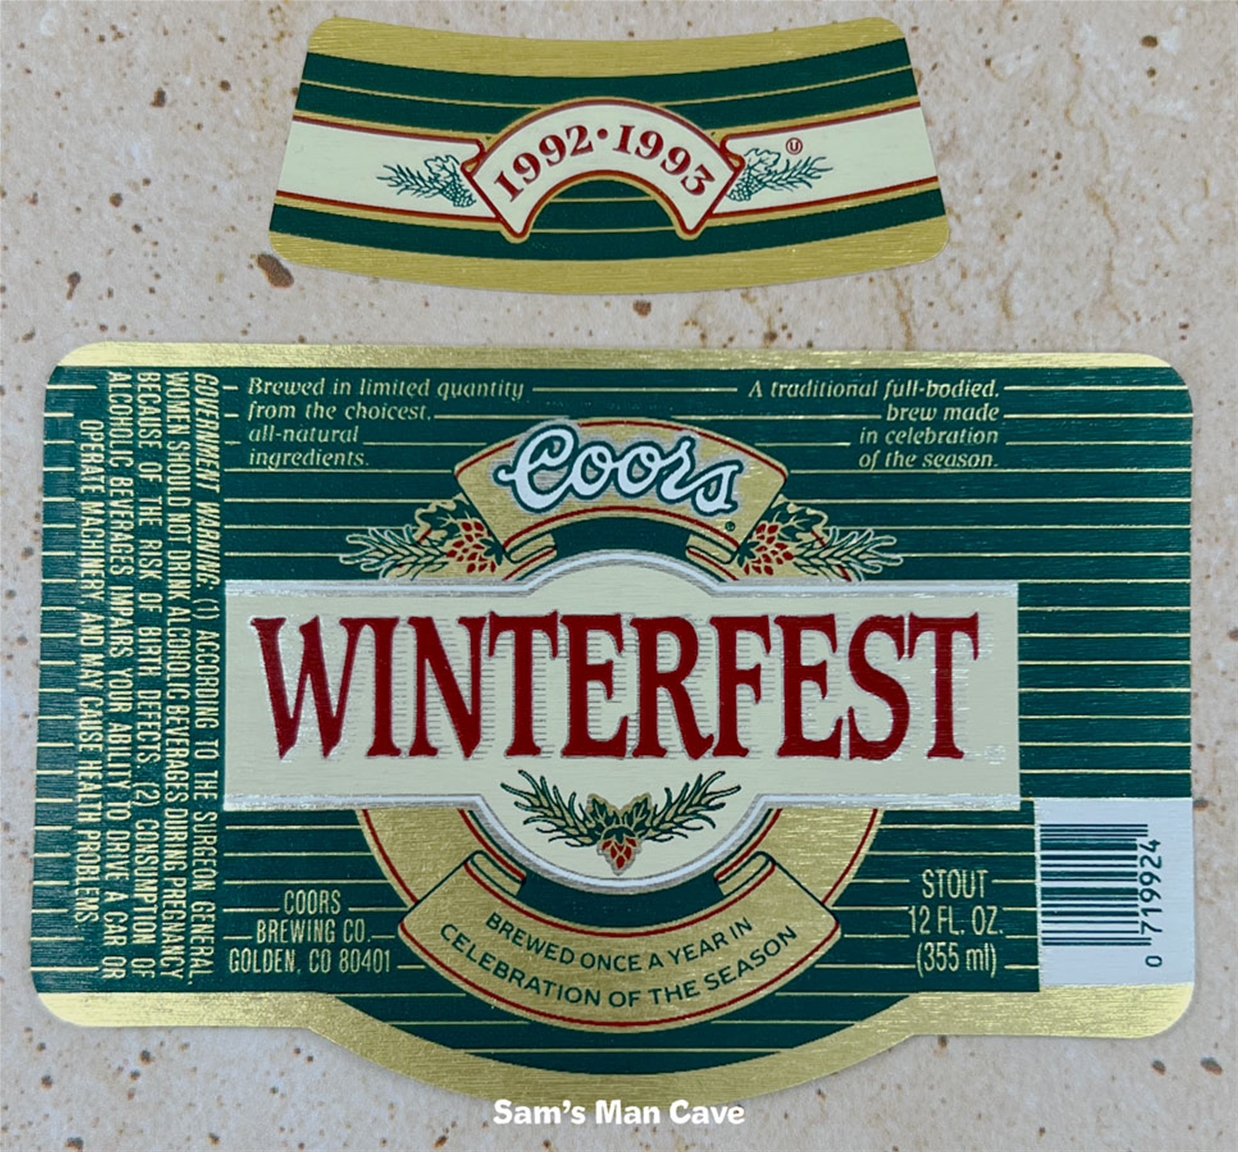 Coors 1992-1993 Winterfest Beer Label with neck